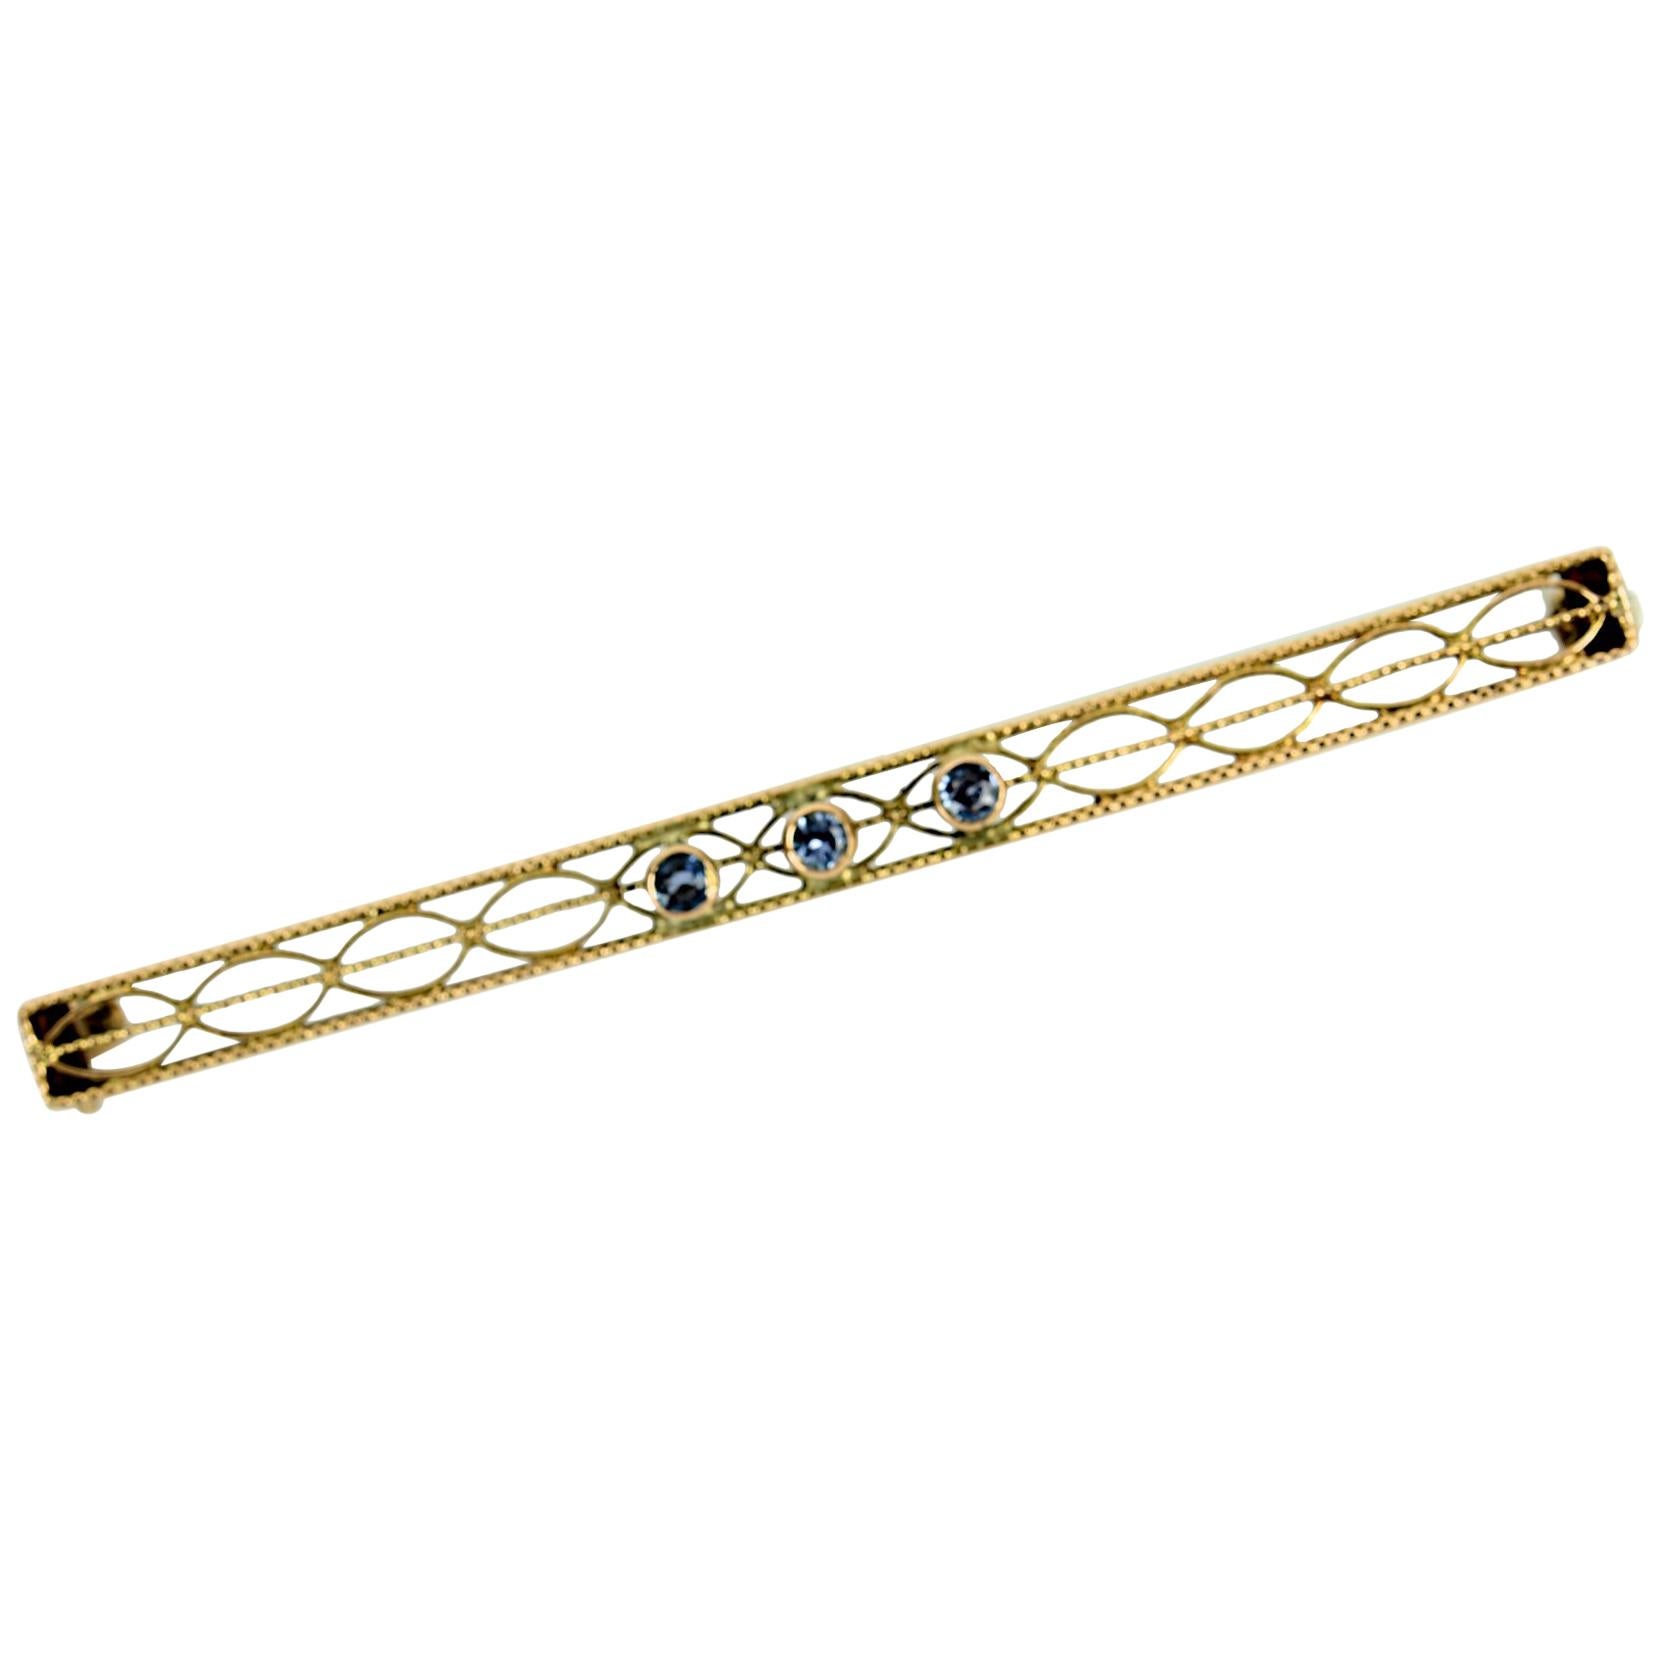 Vintage 10 Karat Yellow Gold, Bar Pin or Brooch Set with 3-Round Sapphires